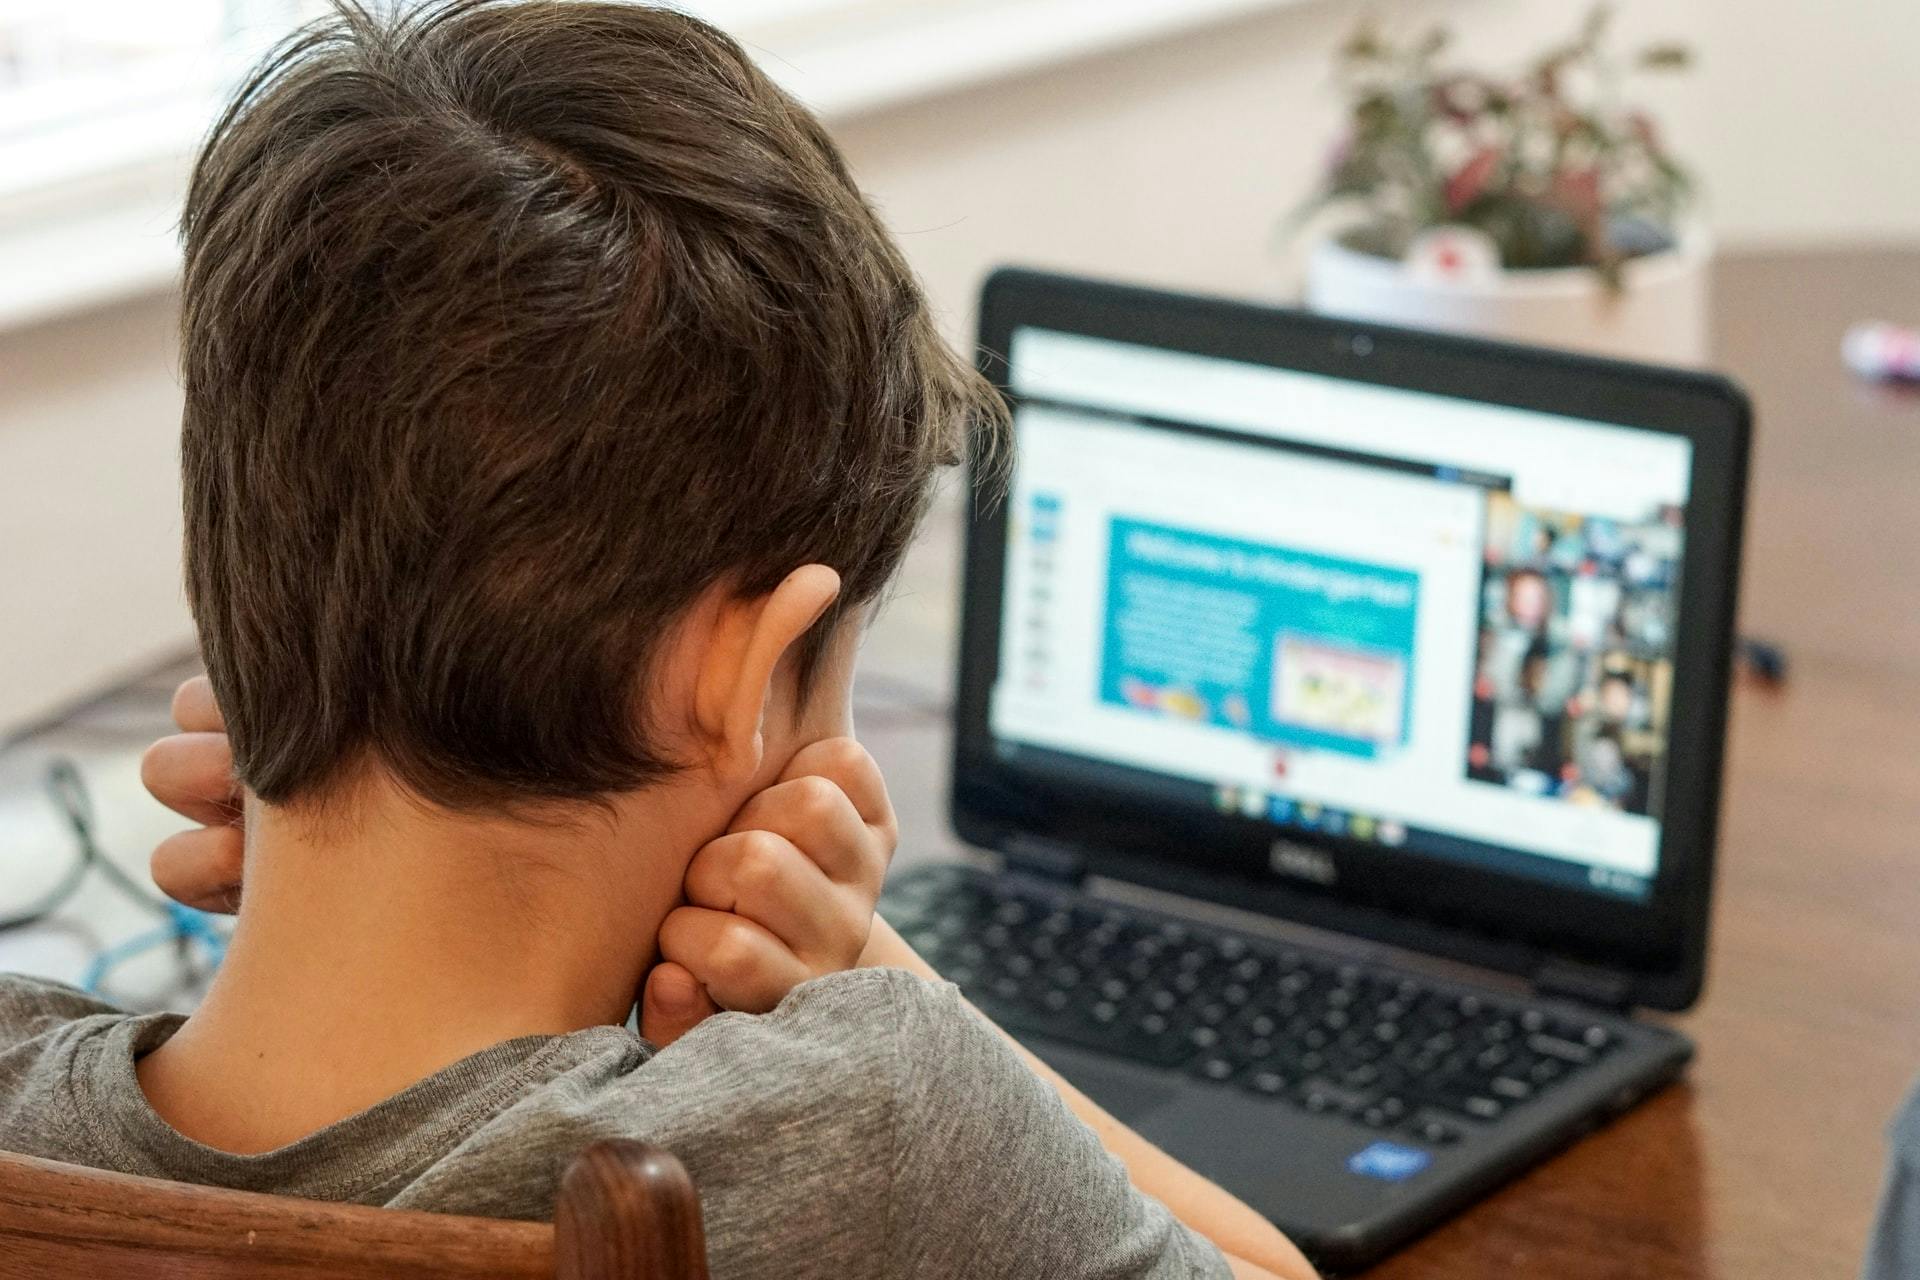 Boy sits at a table with his head in his hands, participating in a lesson with an online learning platform.